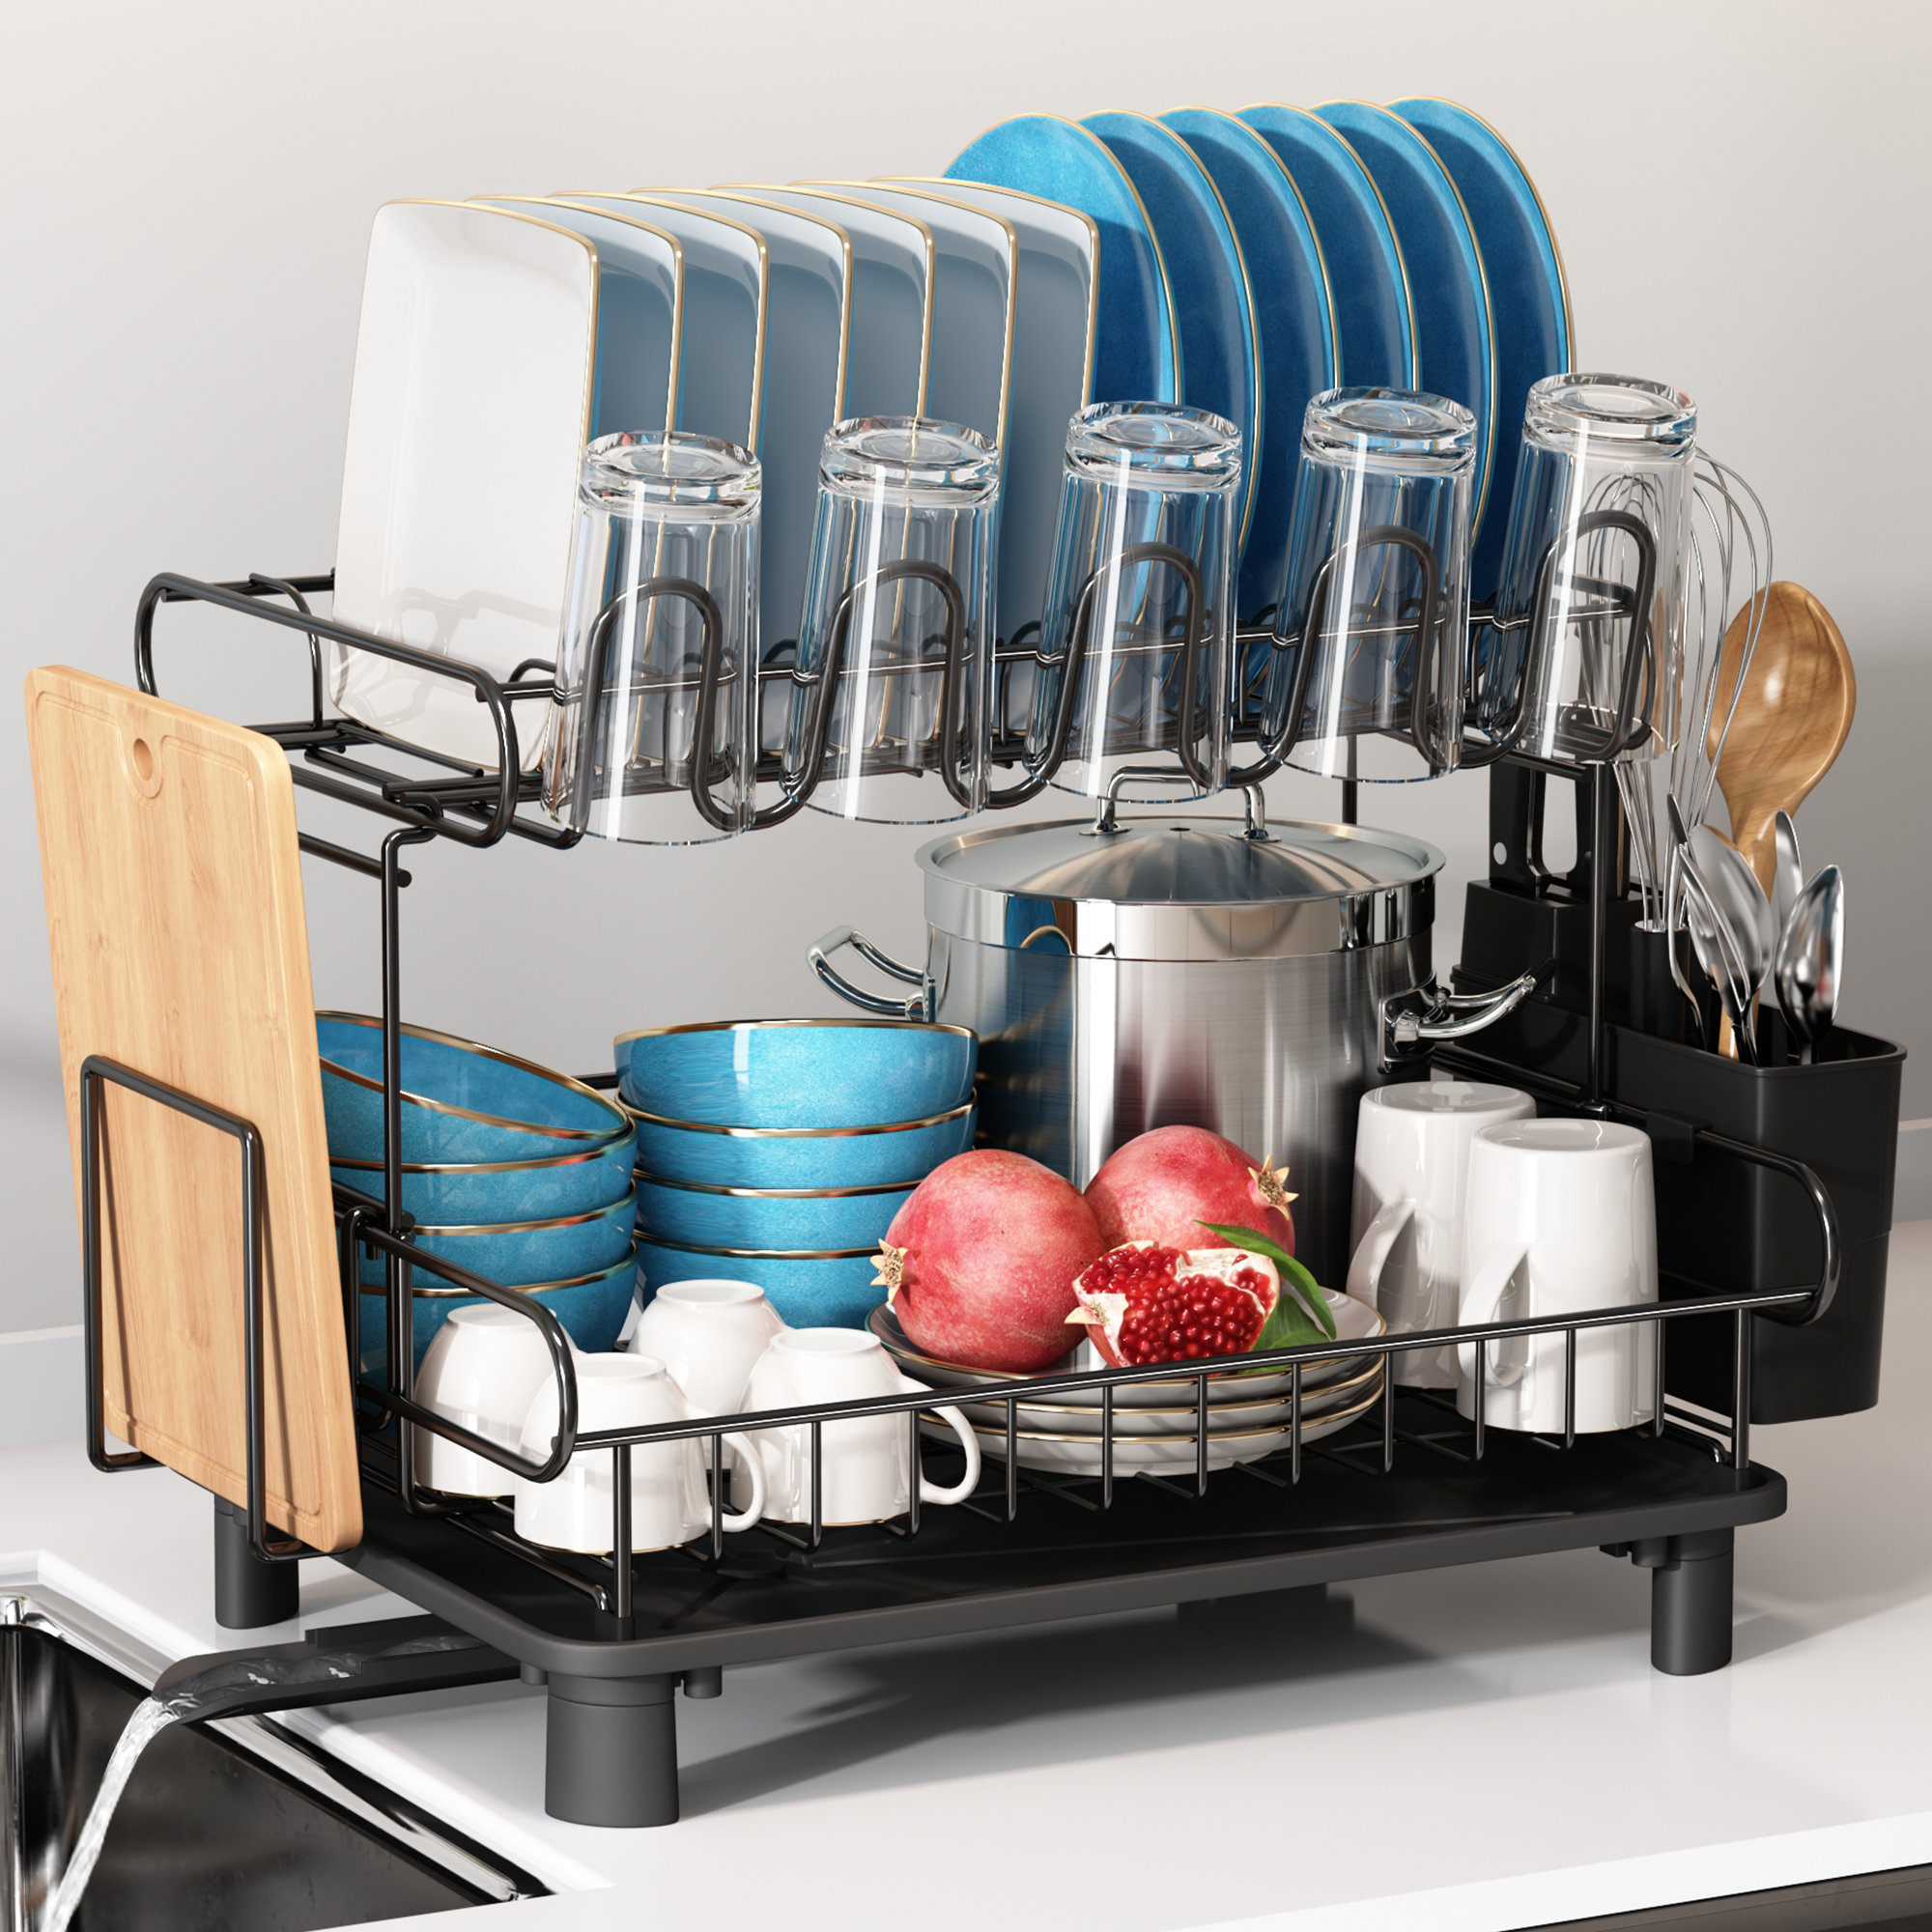  MAJALiS Dish Drying Rack in Sink - Dual-Use for